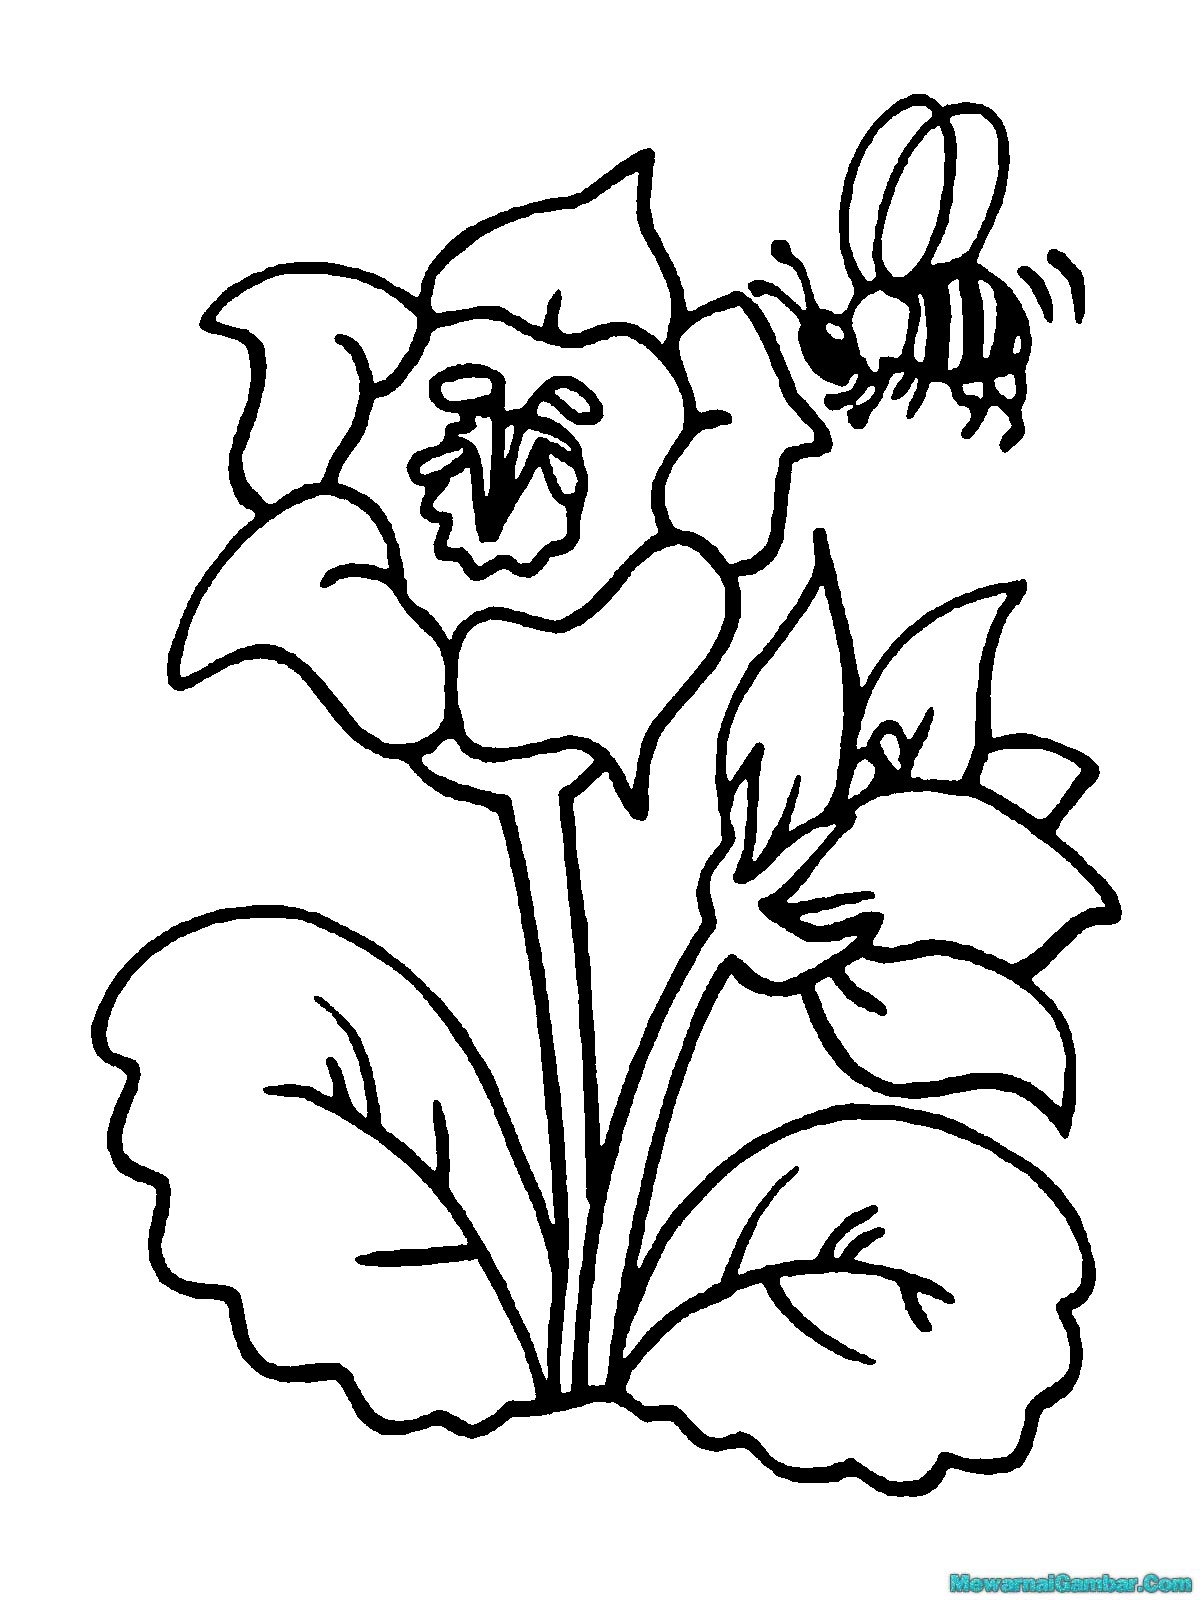  Bunga  Coloring  Pages  Coloring  Pages 